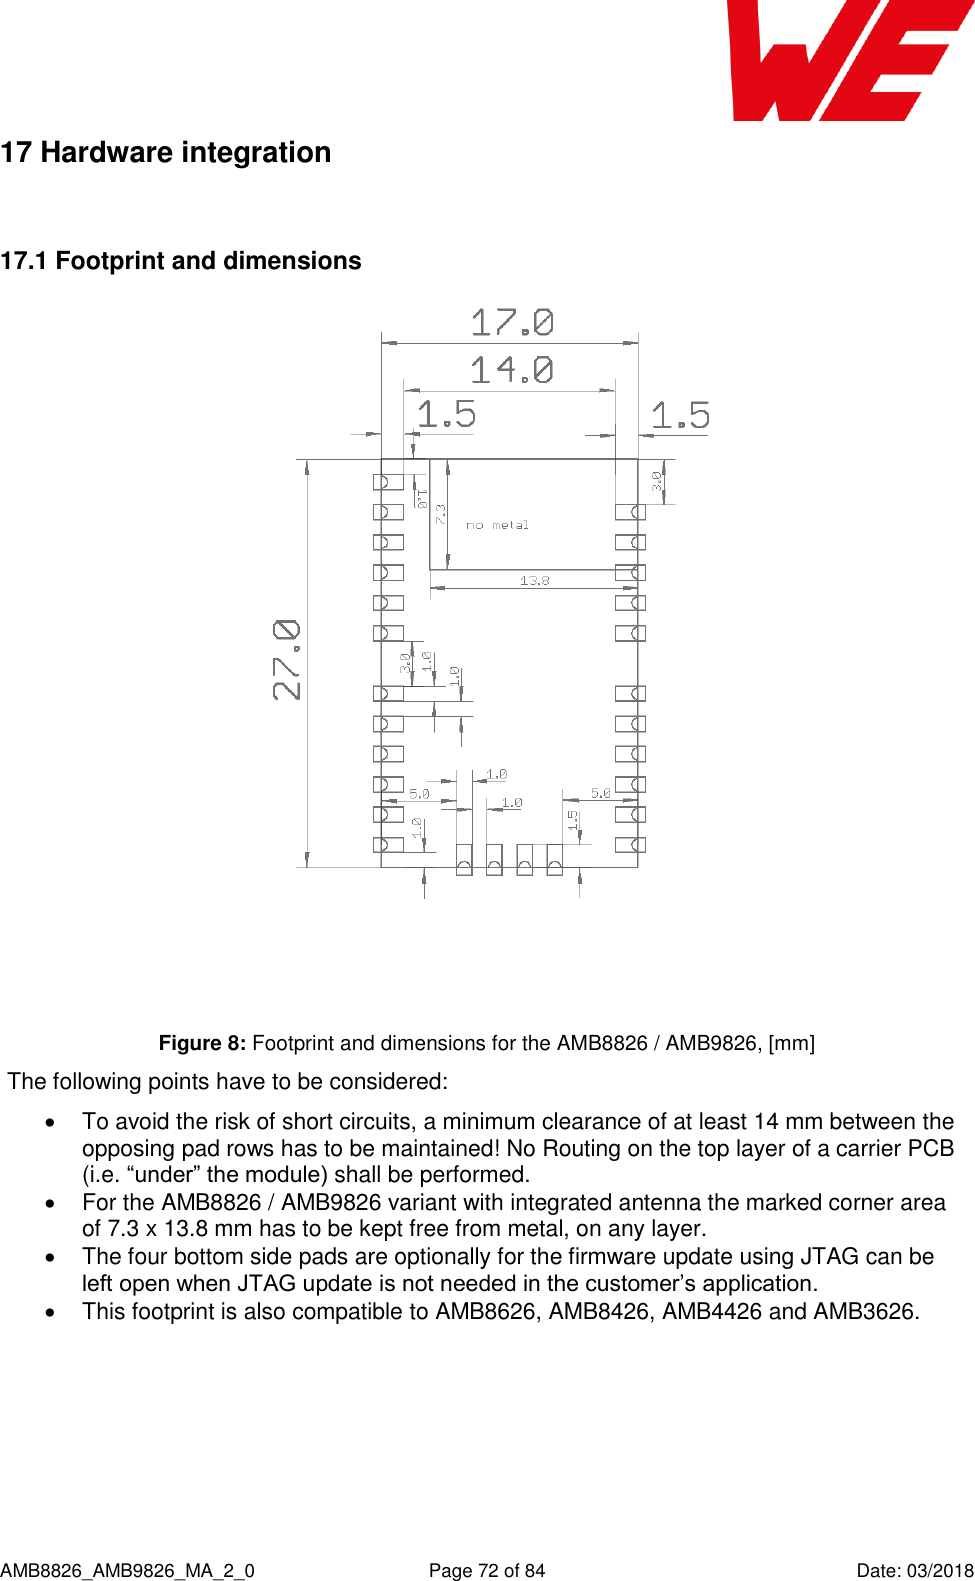      AMB8826_AMB9826_MA_2_0  Page 72 of 84  Date: 03/2018 17 Hardware integration  17.1 Footprint and dimensions  Figure 8: Footprint and dimensions for the AMB8826 / AMB9826, [mm] The following points have to be considered:   To avoid the risk of short circuits, a minimum clearance of at least 14 mm between the opposing pad rows has to be maintained! No Routing on the top layer of a carrier PCB (i.e. “under” the module) shall be performed.   For the AMB8826 / AMB9826 variant with integrated antenna the marked corner area of 7.3 x 13.8 mm has to be kept free from metal, on any layer.   The four bottom side pads are optionally for the firmware update using JTAG can be left open when JTAG update is not needed in the customer’s application.   This footprint is also compatible to AMB8626, AMB8426, AMB4426 and AMB3626.   